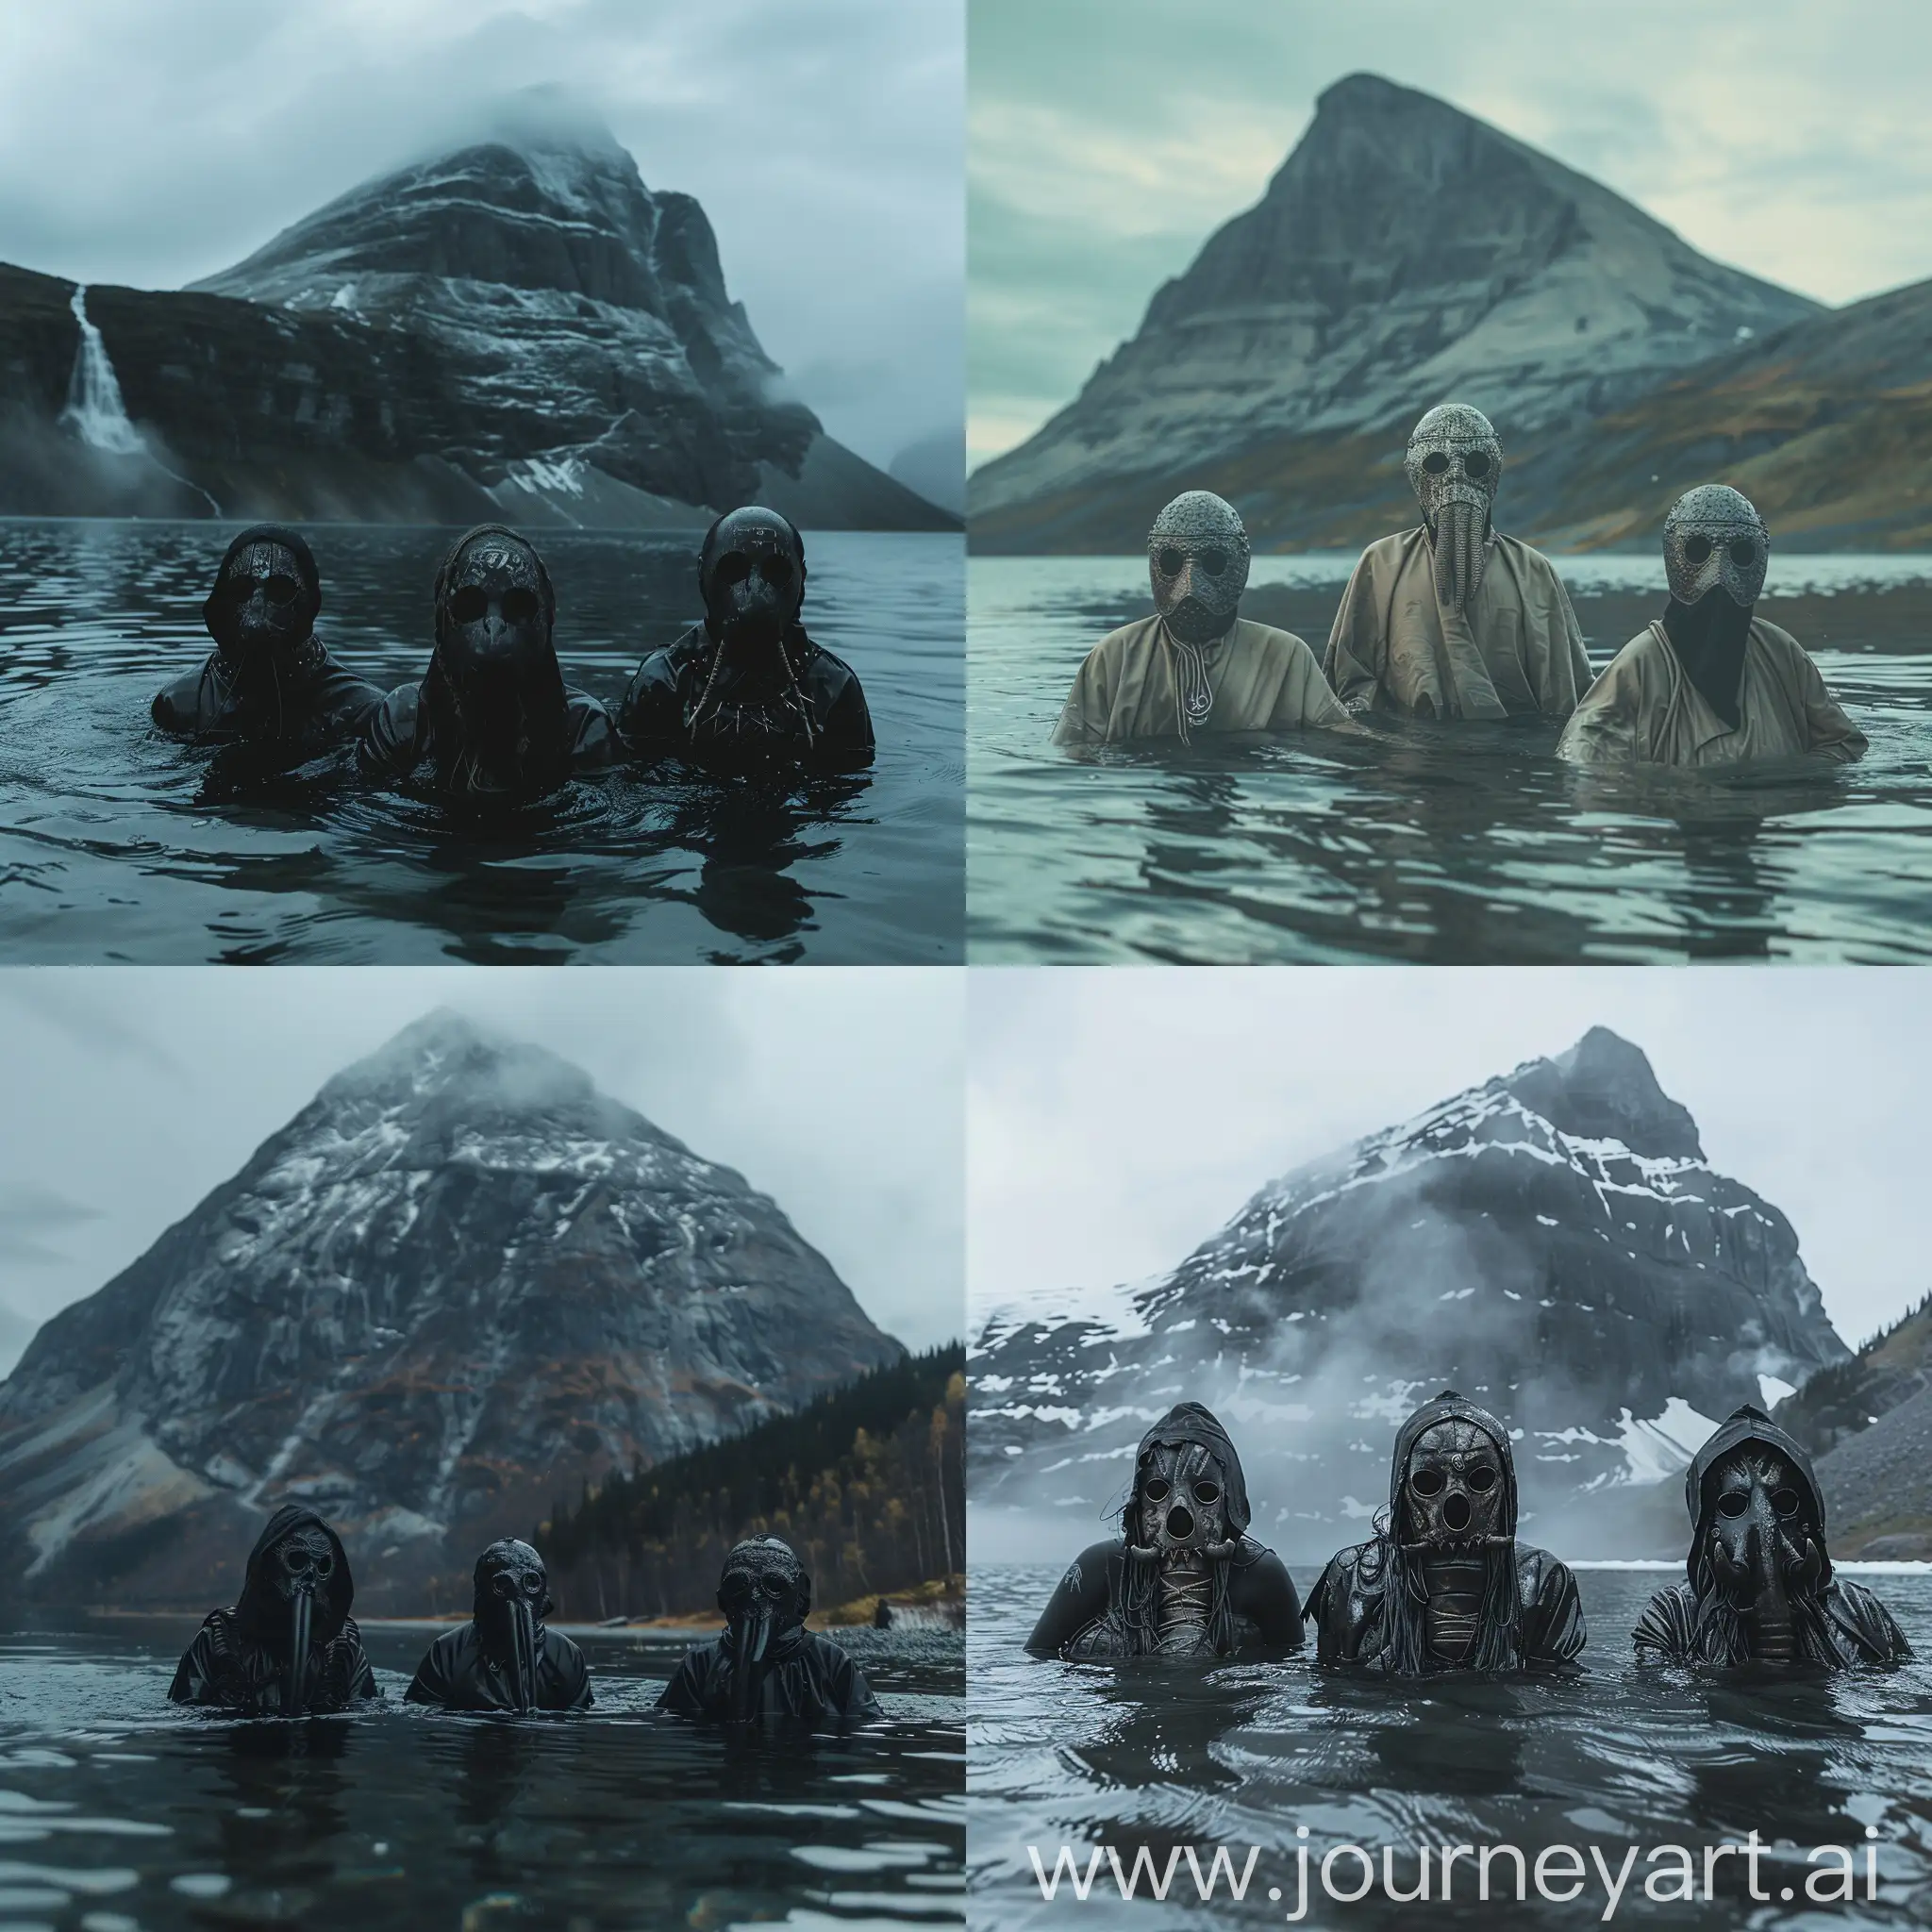 --sref https://encrypted-tbn0.gstatic.com/images?q=tbn:ANd9GcS3i8i1FLduCEsOWVSrUFJVwnz6hWL0eSXOOw&usqp=CAU three people in a body of water with a mountain in the background, black hollow eyes, runic words, tiktok video, inuit heritage, old humanoid ents, wlup, watermark:-1, gaping gills and baleen, meme, finnish naturalism, the masks come off at night, frontpage, aliased, high qulity, peoples --ar 4:7